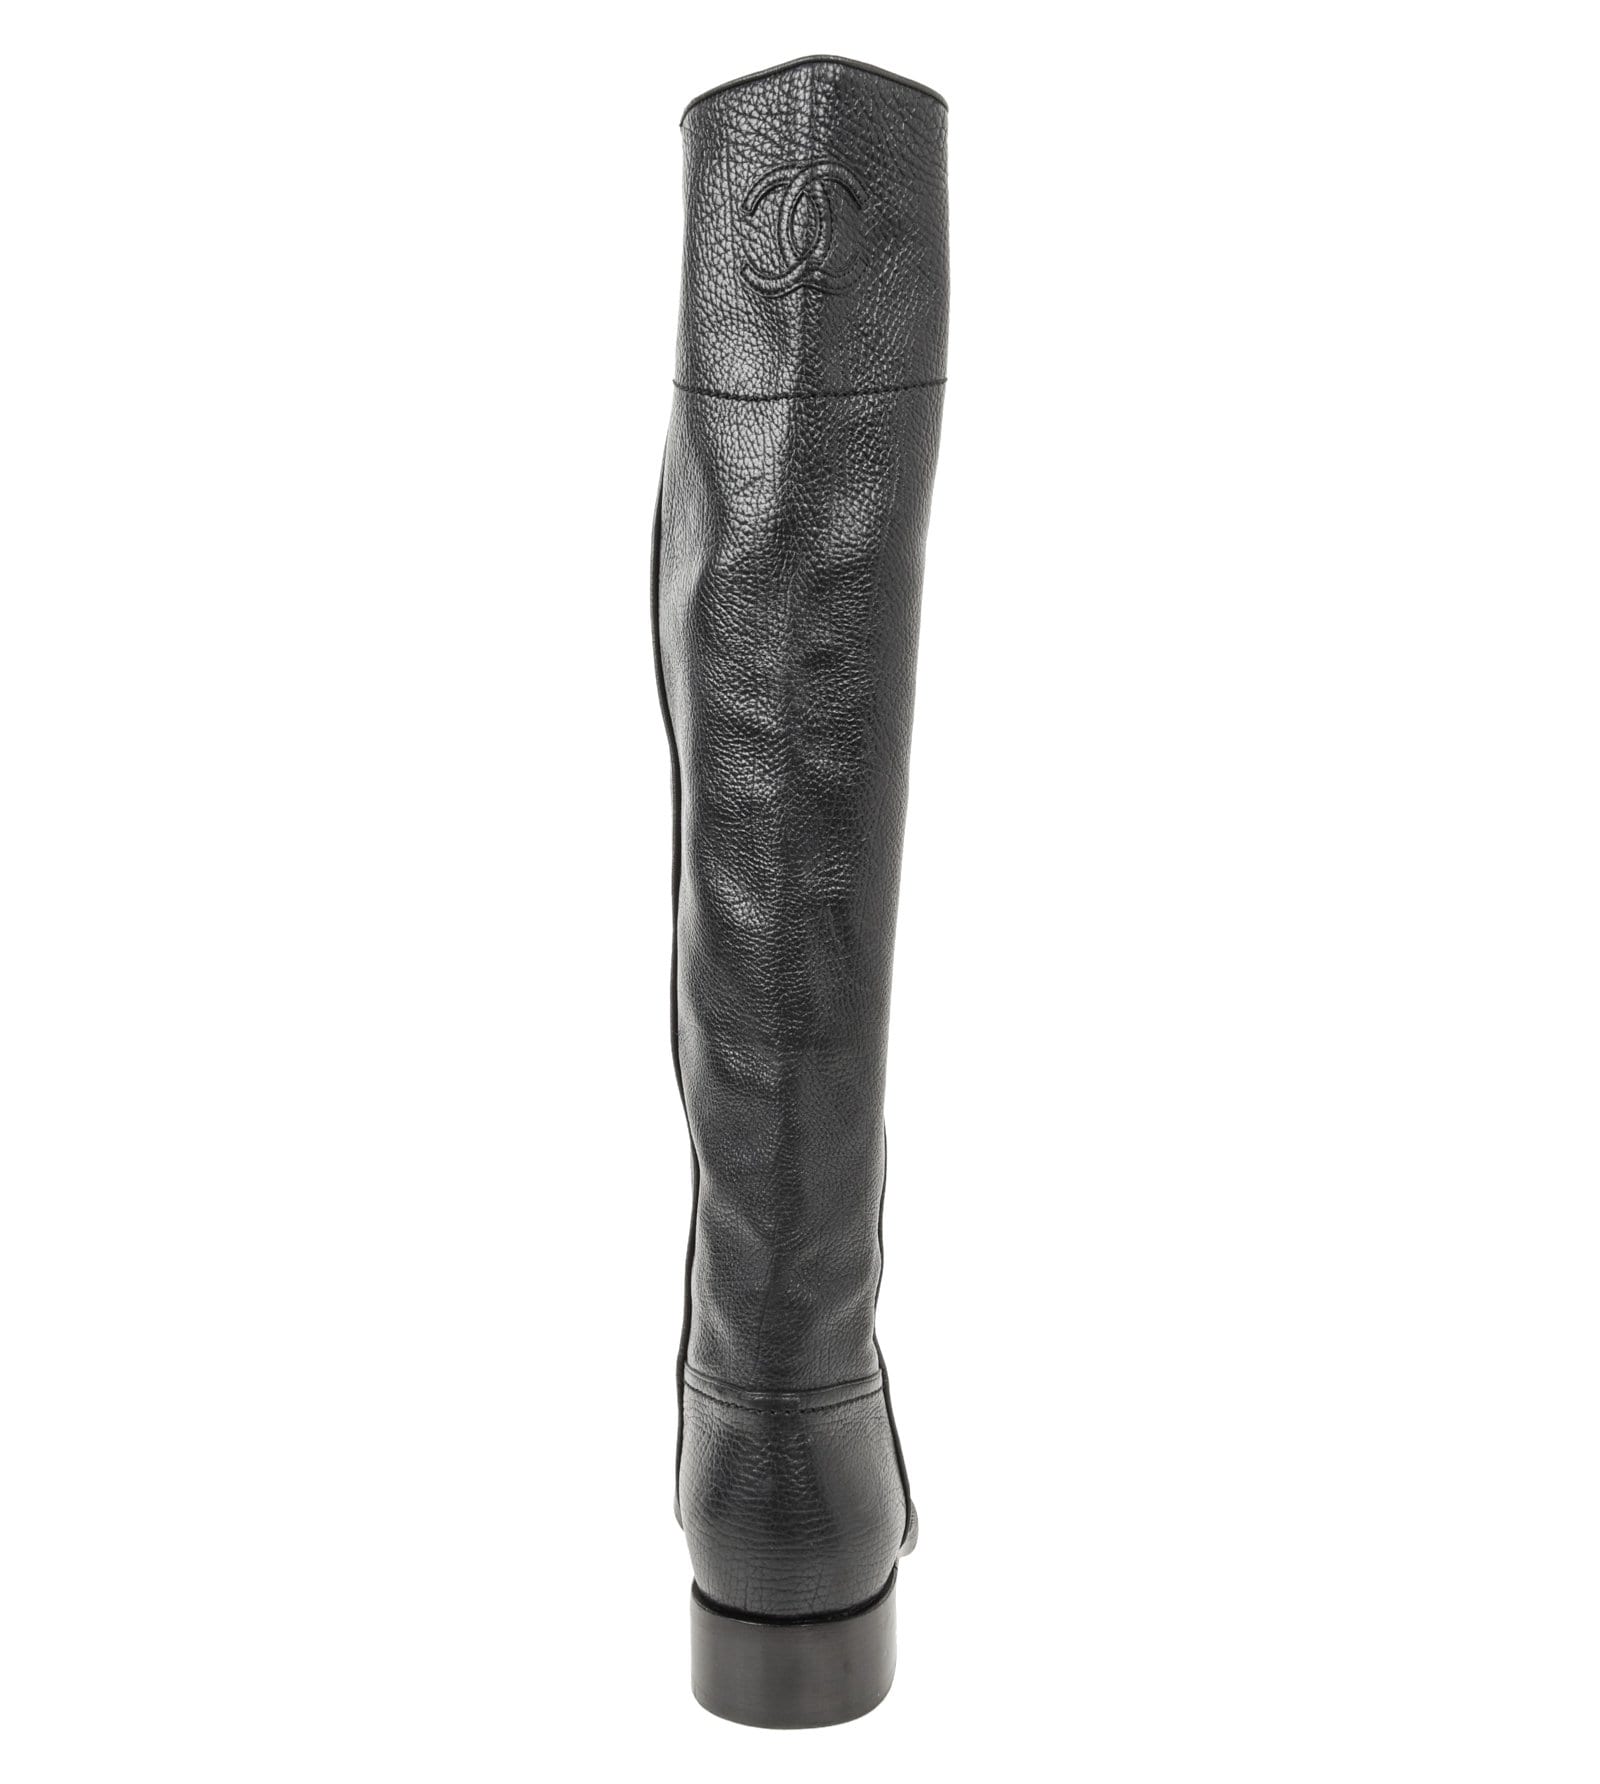 Chanel Boot Black Textured Leather Flat Knee High CC Logo 39.5 / 9.5 - mightychic